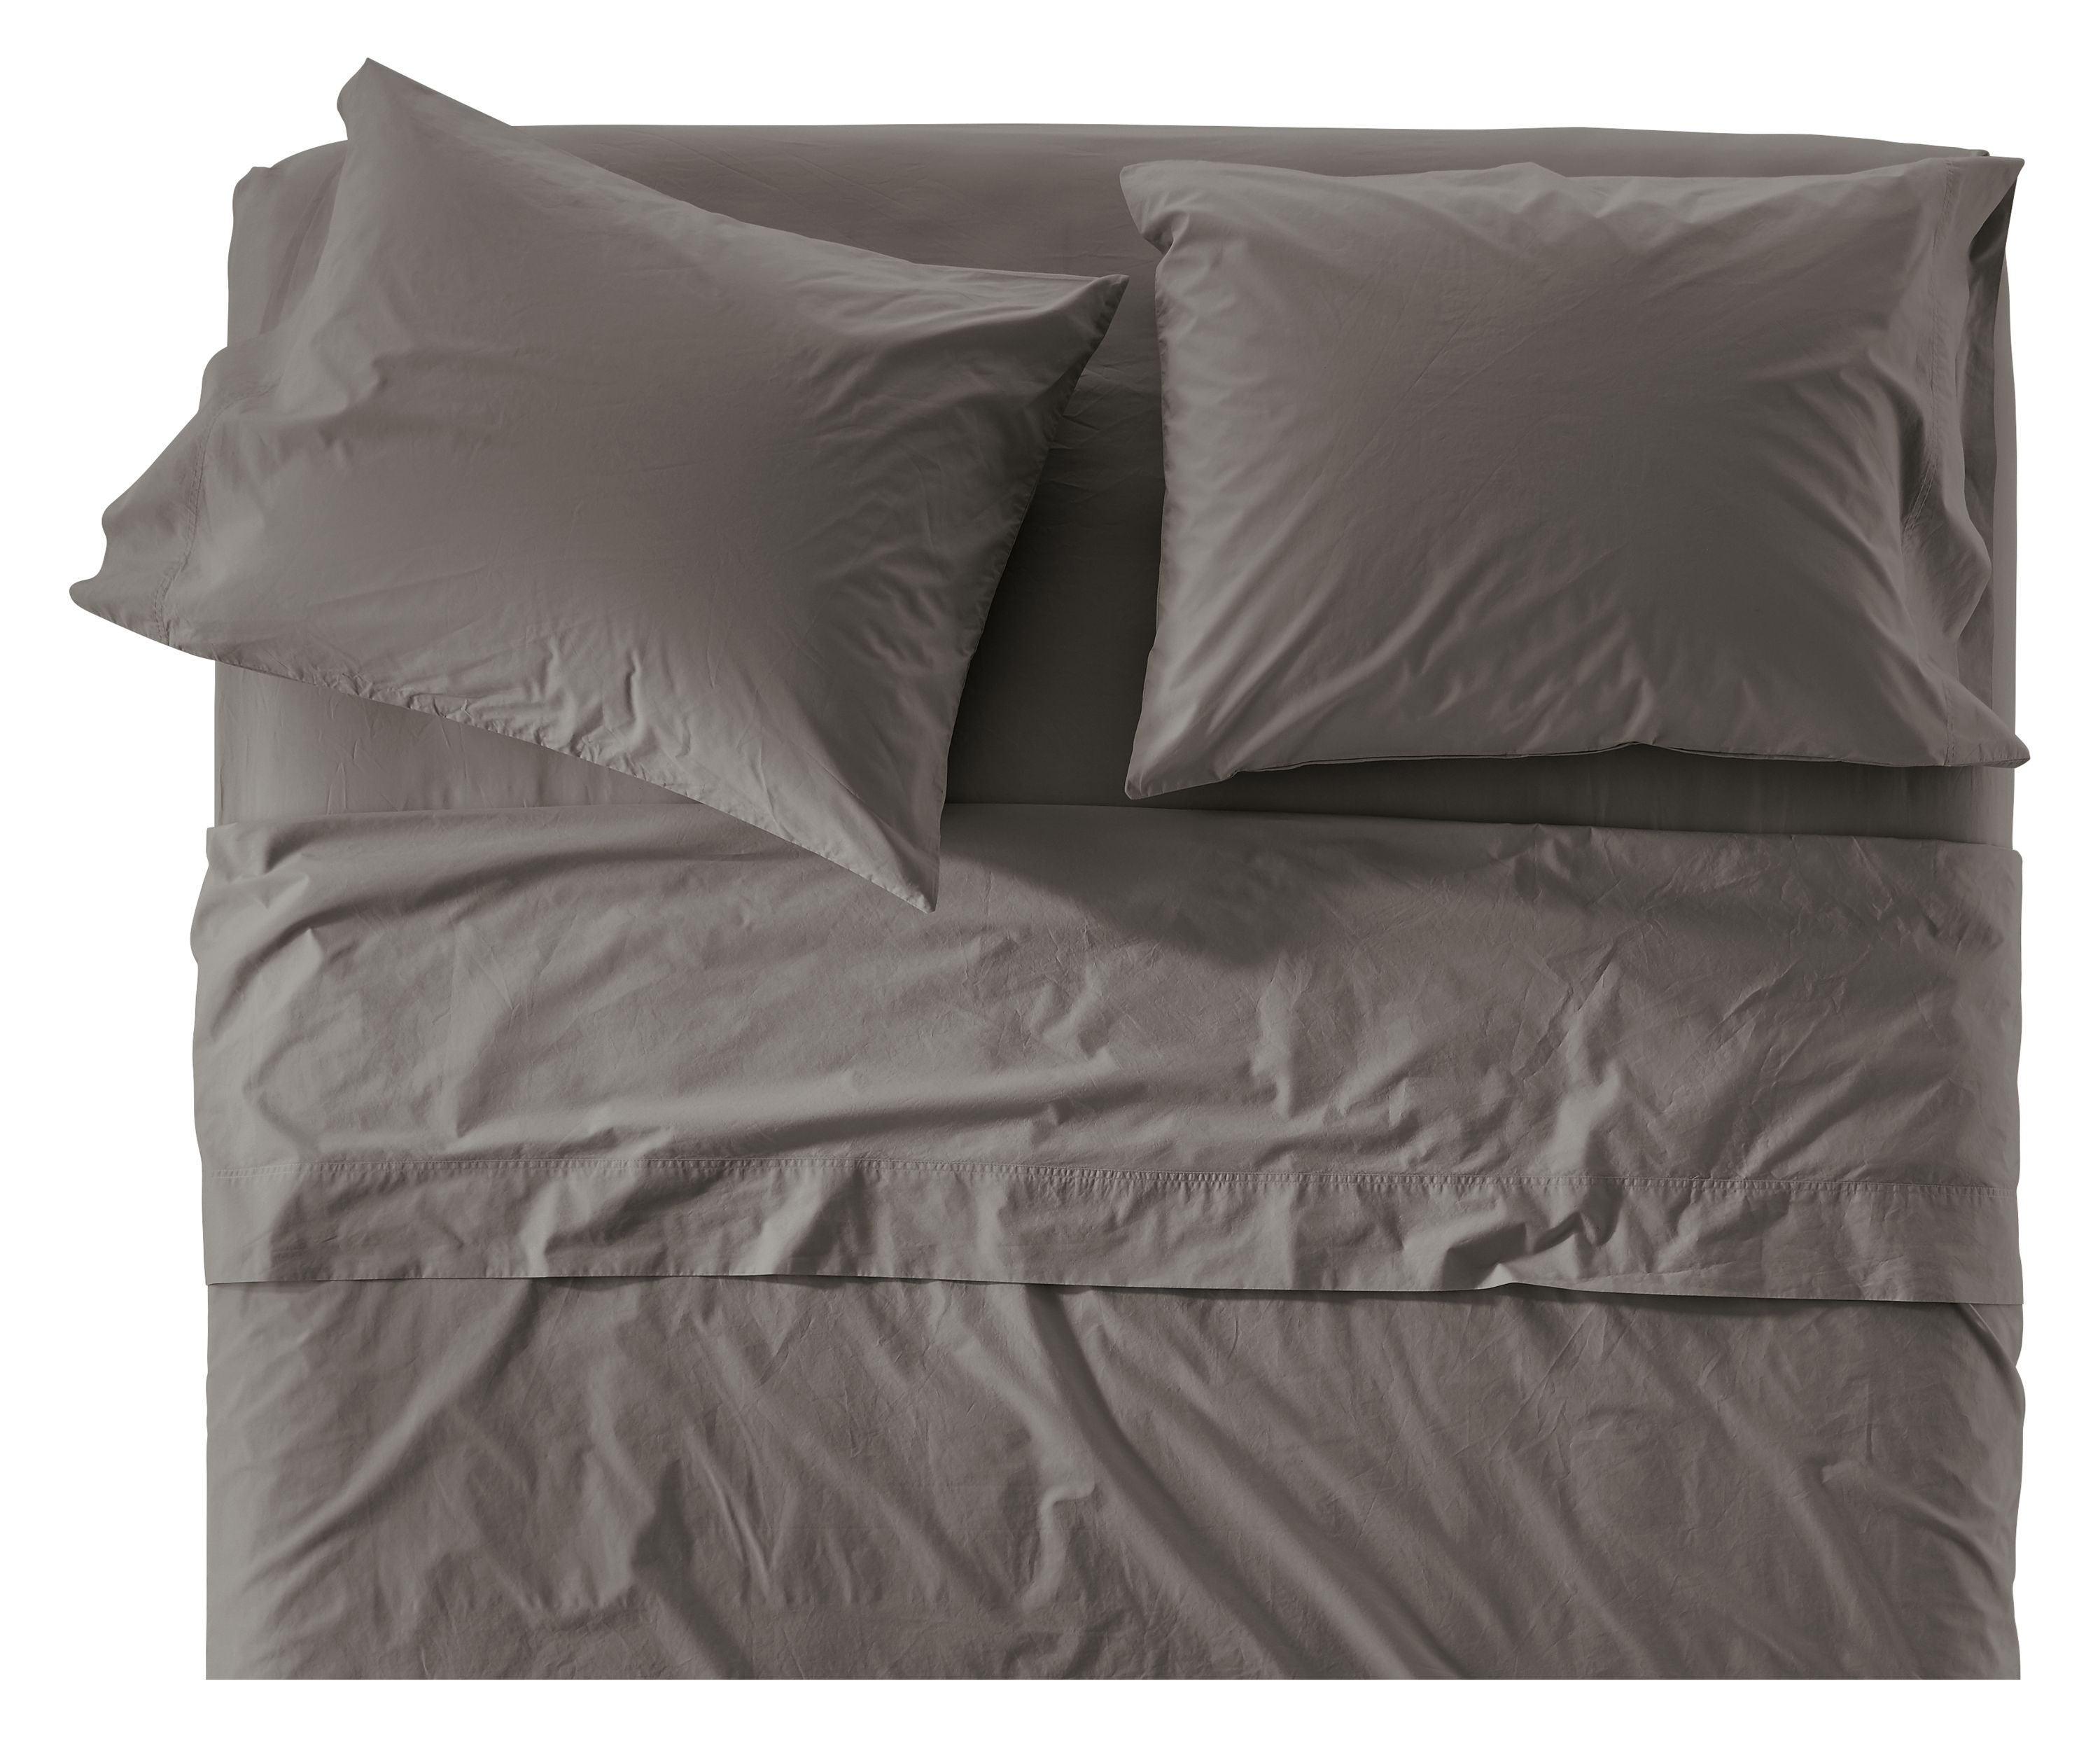 Signature Cotton Percale Sheets & Pillowcases - Modern Bedroom ...